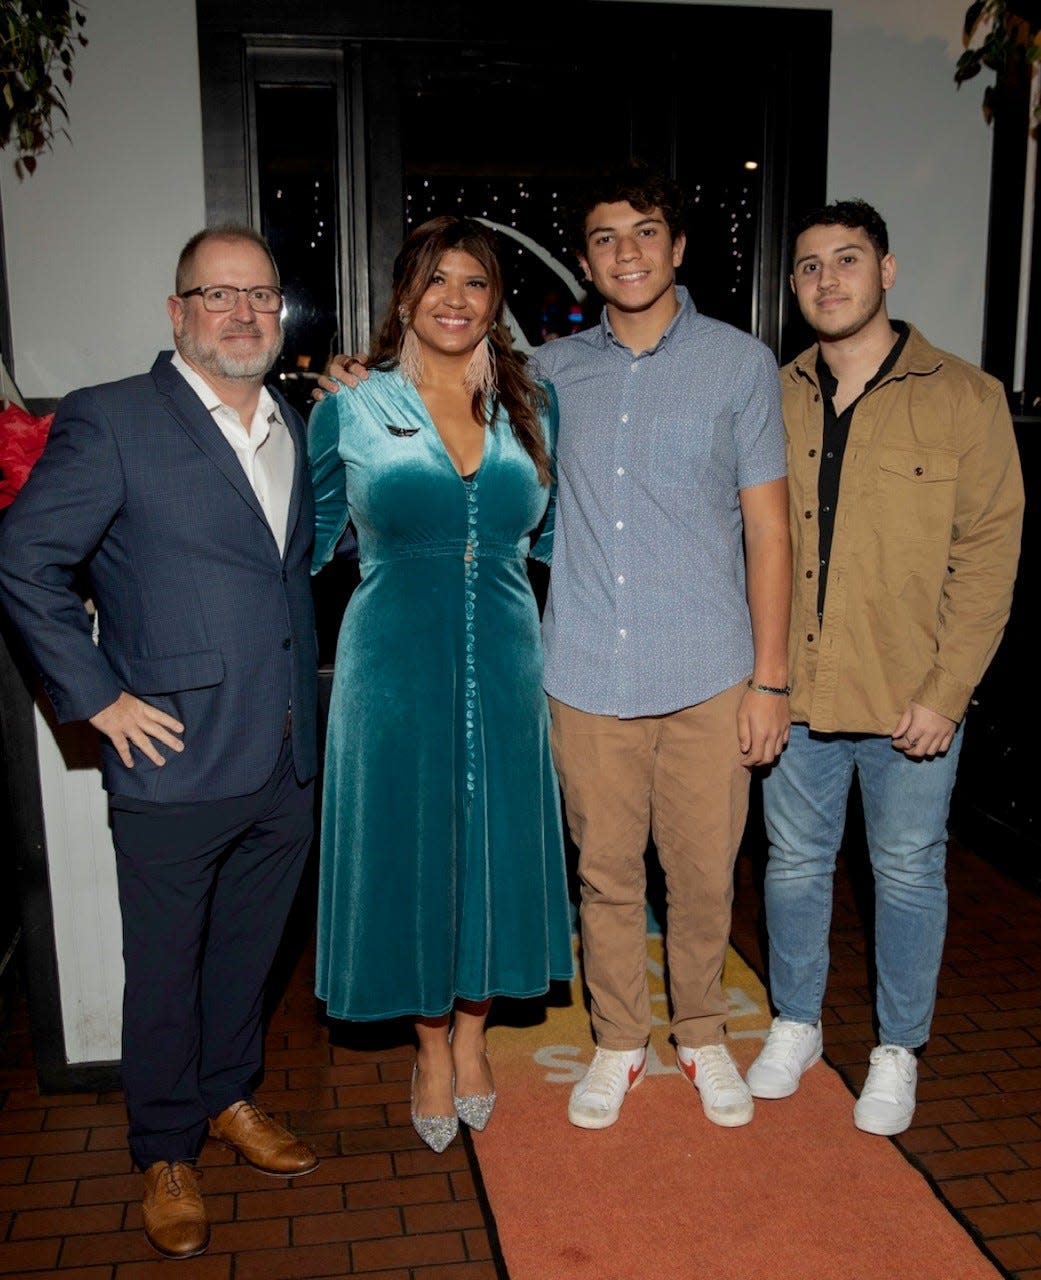 From left to right: Joel, Wendy, Daniel and Noah Smith.